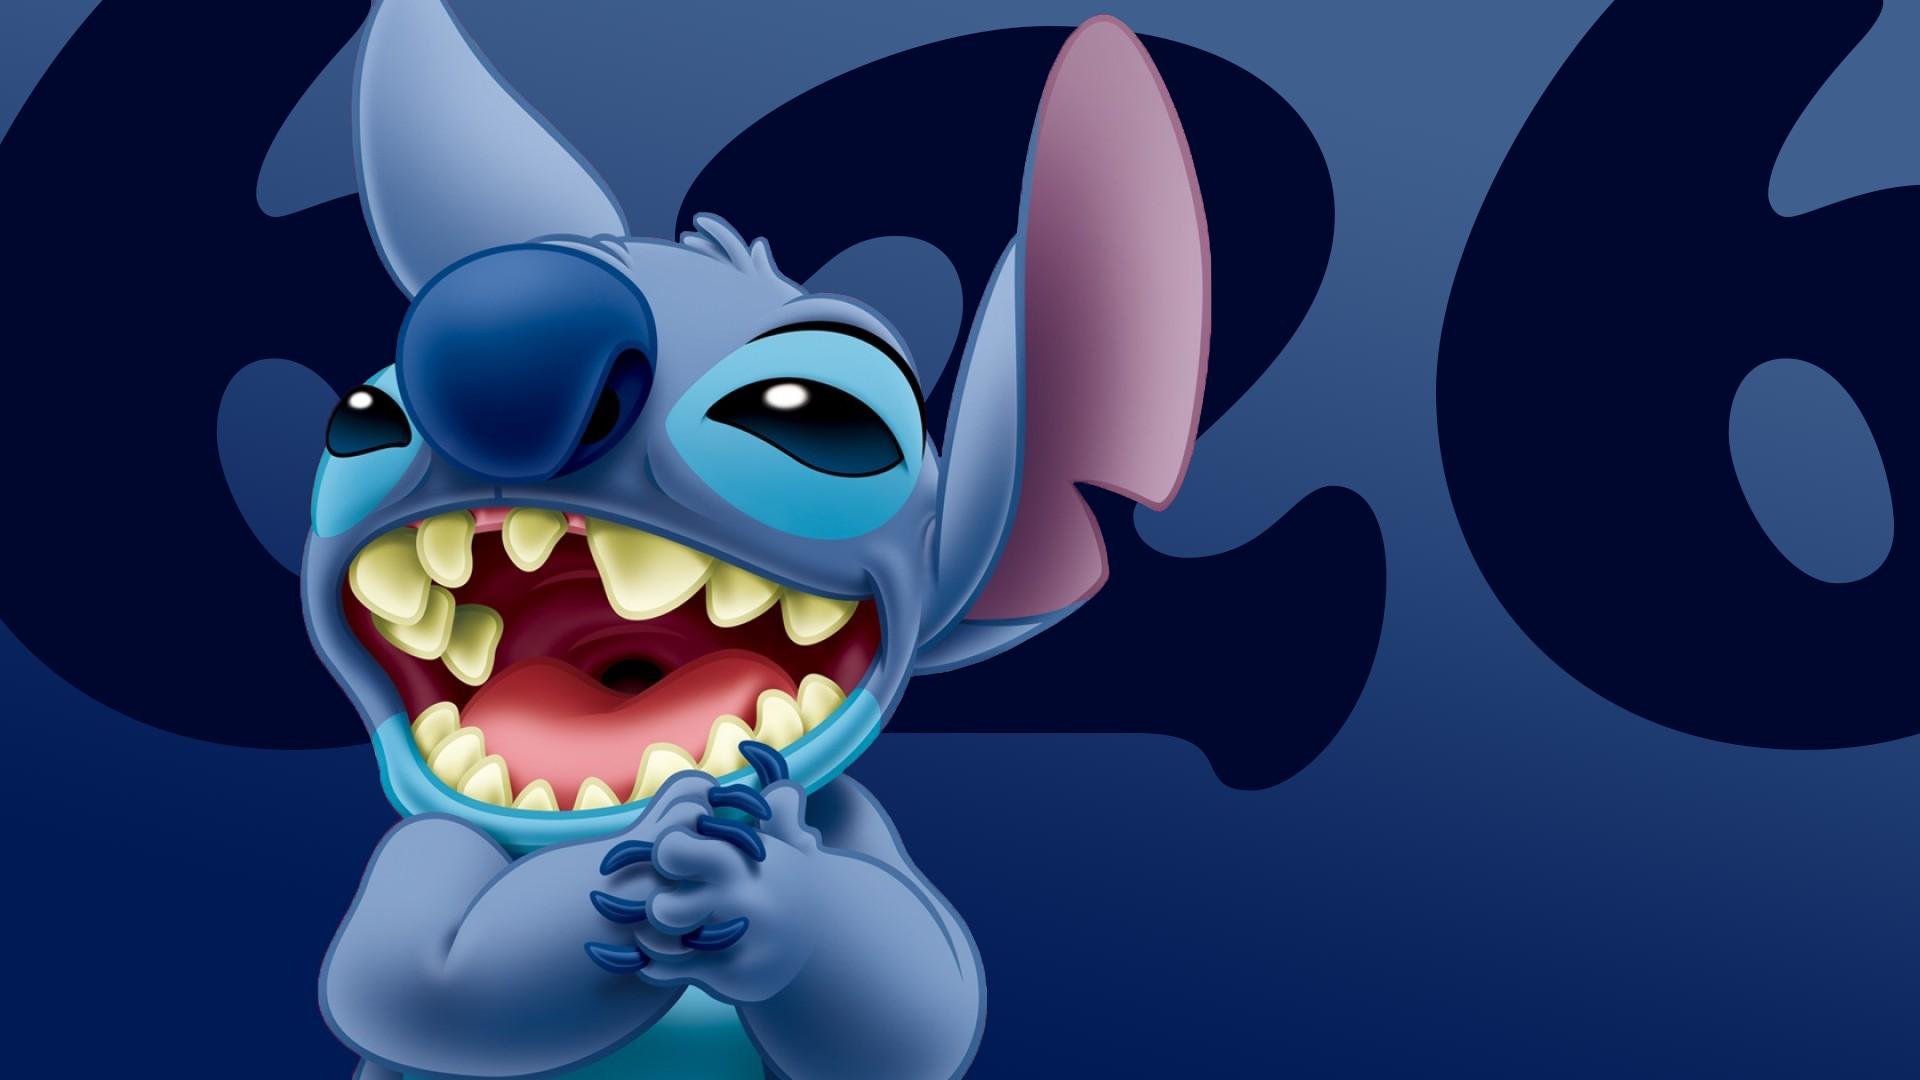 Lilo and Stitch wallpapers 1920x1080 Full HD.